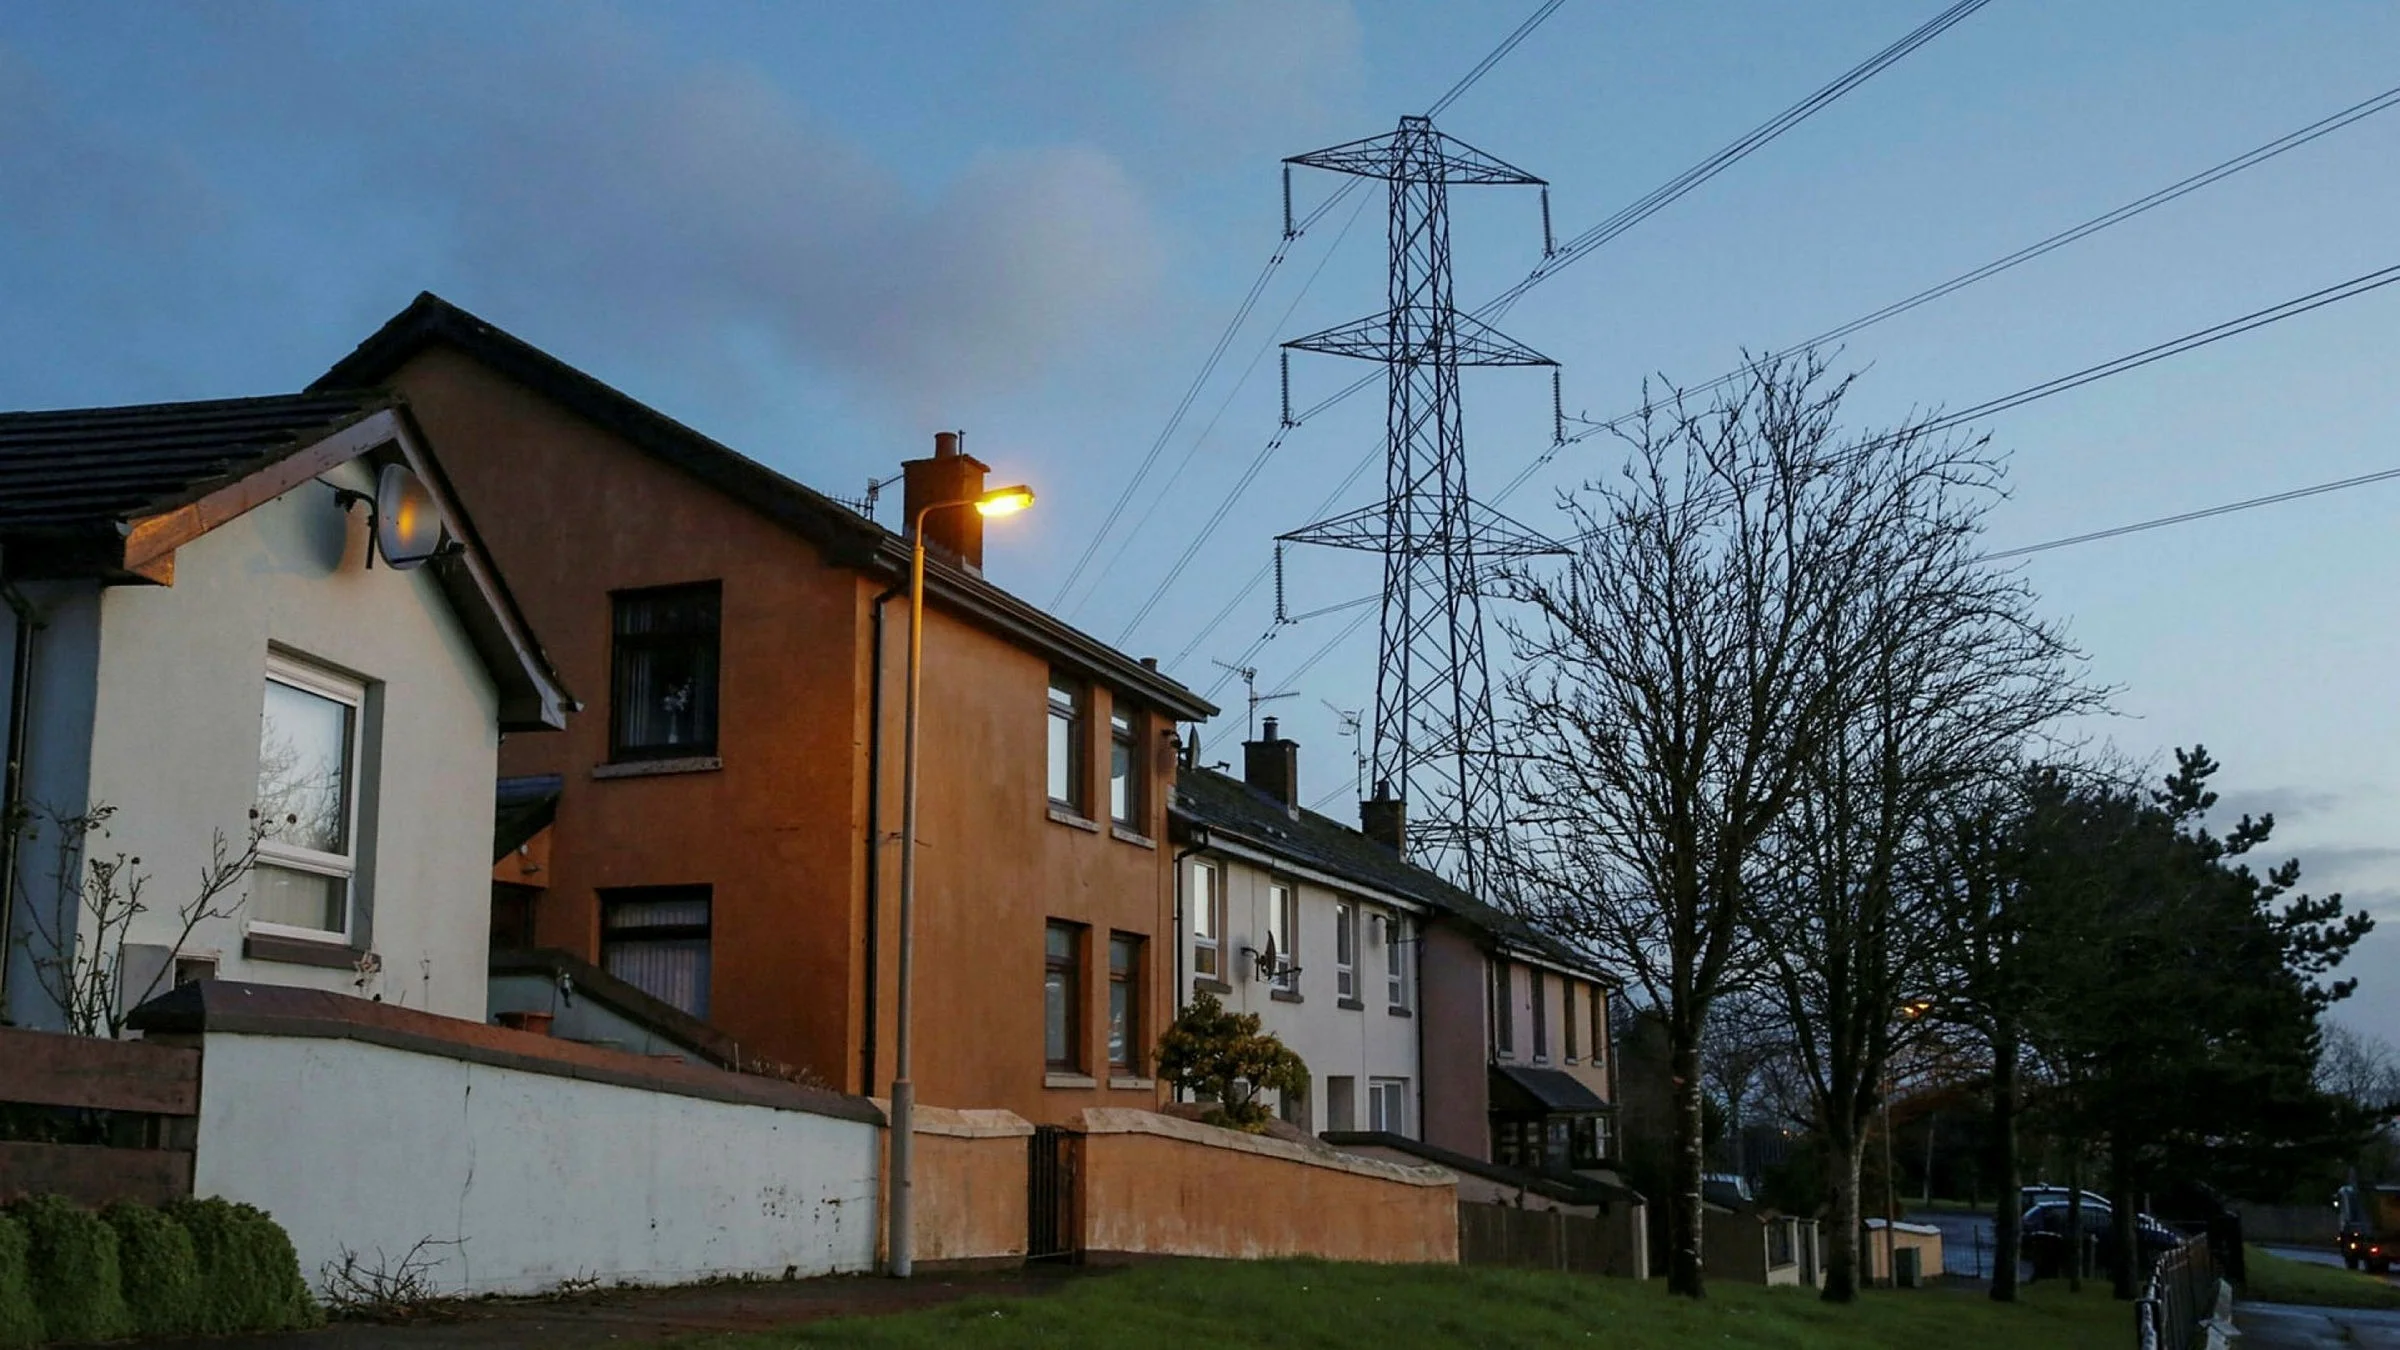 Household energy prices in the United Kingdom are expected to increase by 80% in October 2022.